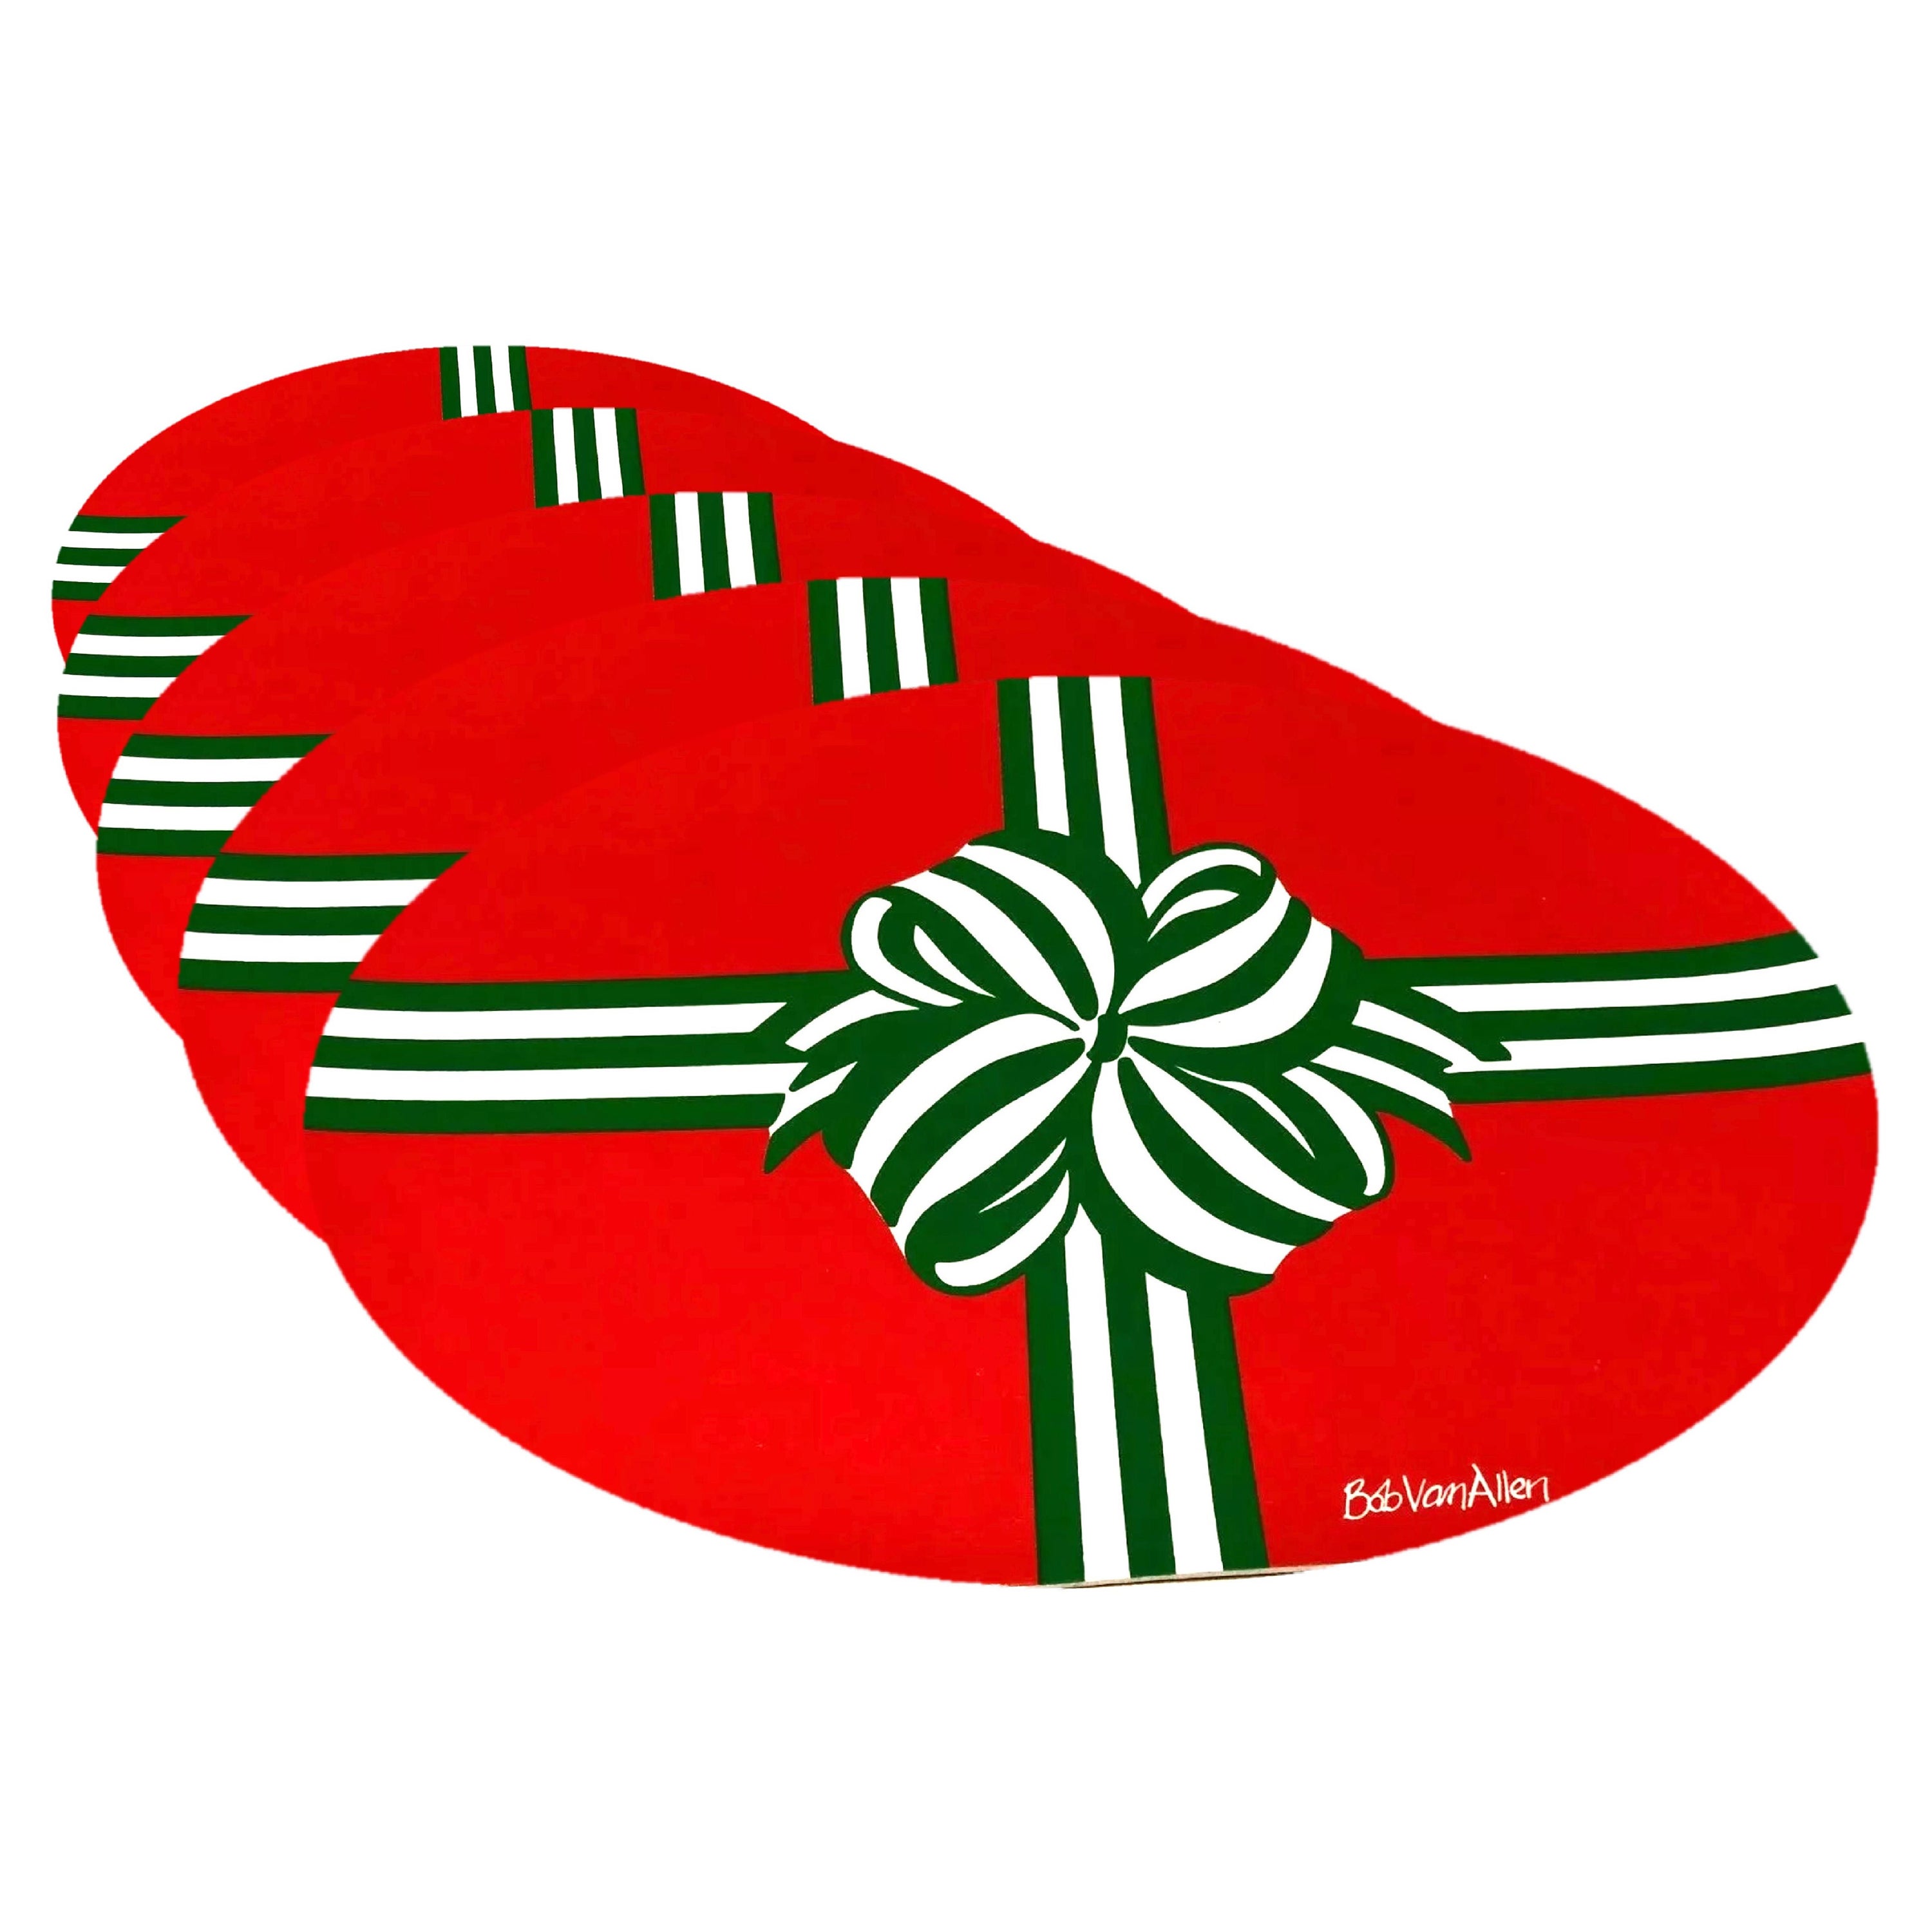 Bob Van Allen Holiday Bow Red & Green Oval Placemat Set of 5 & Napkin Set of 10